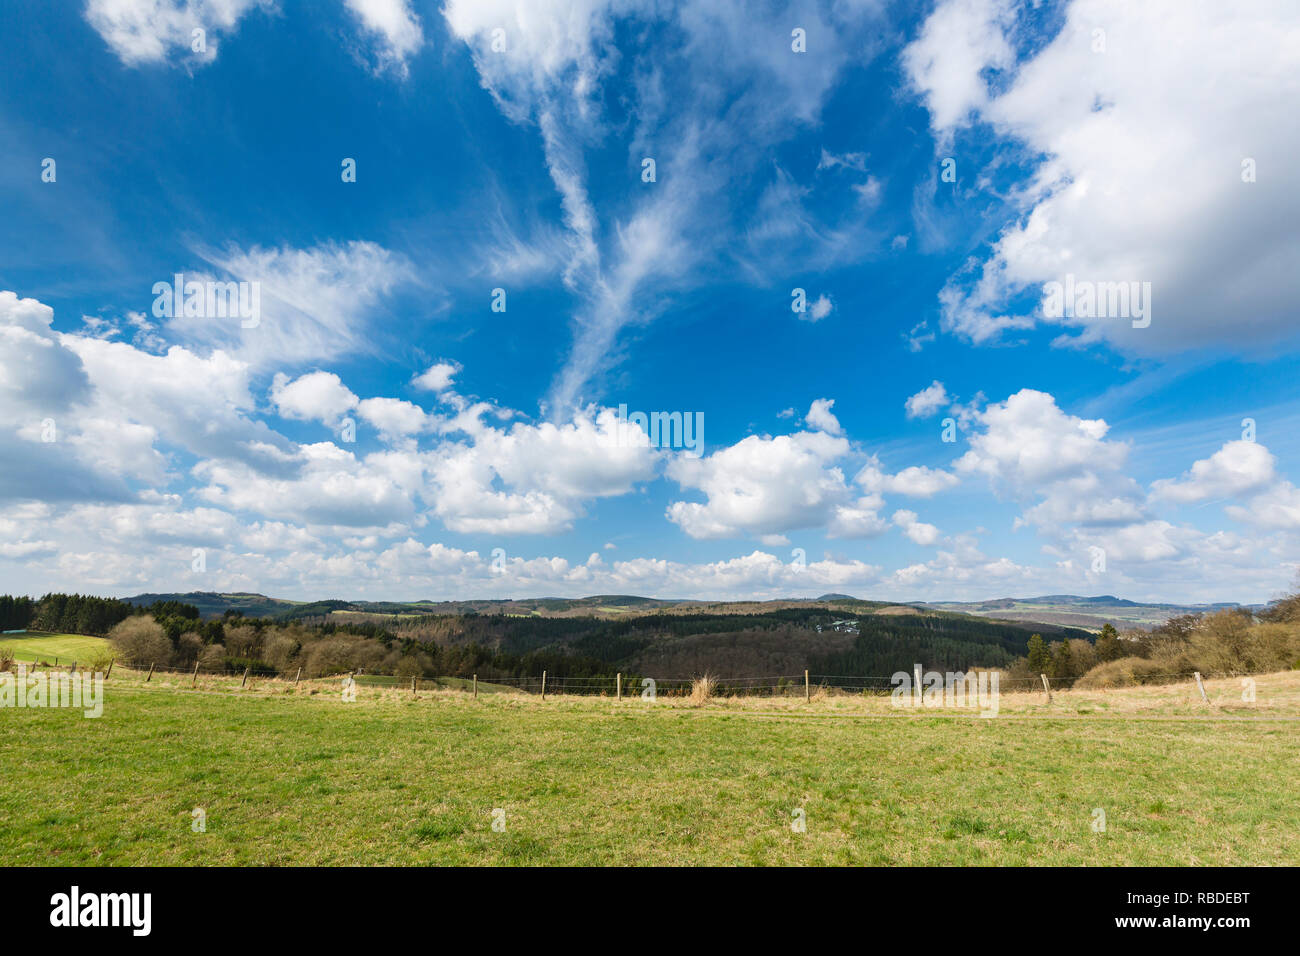 View over the southern Eifel hills near Daun, Germany with blue sky. Stock Photo